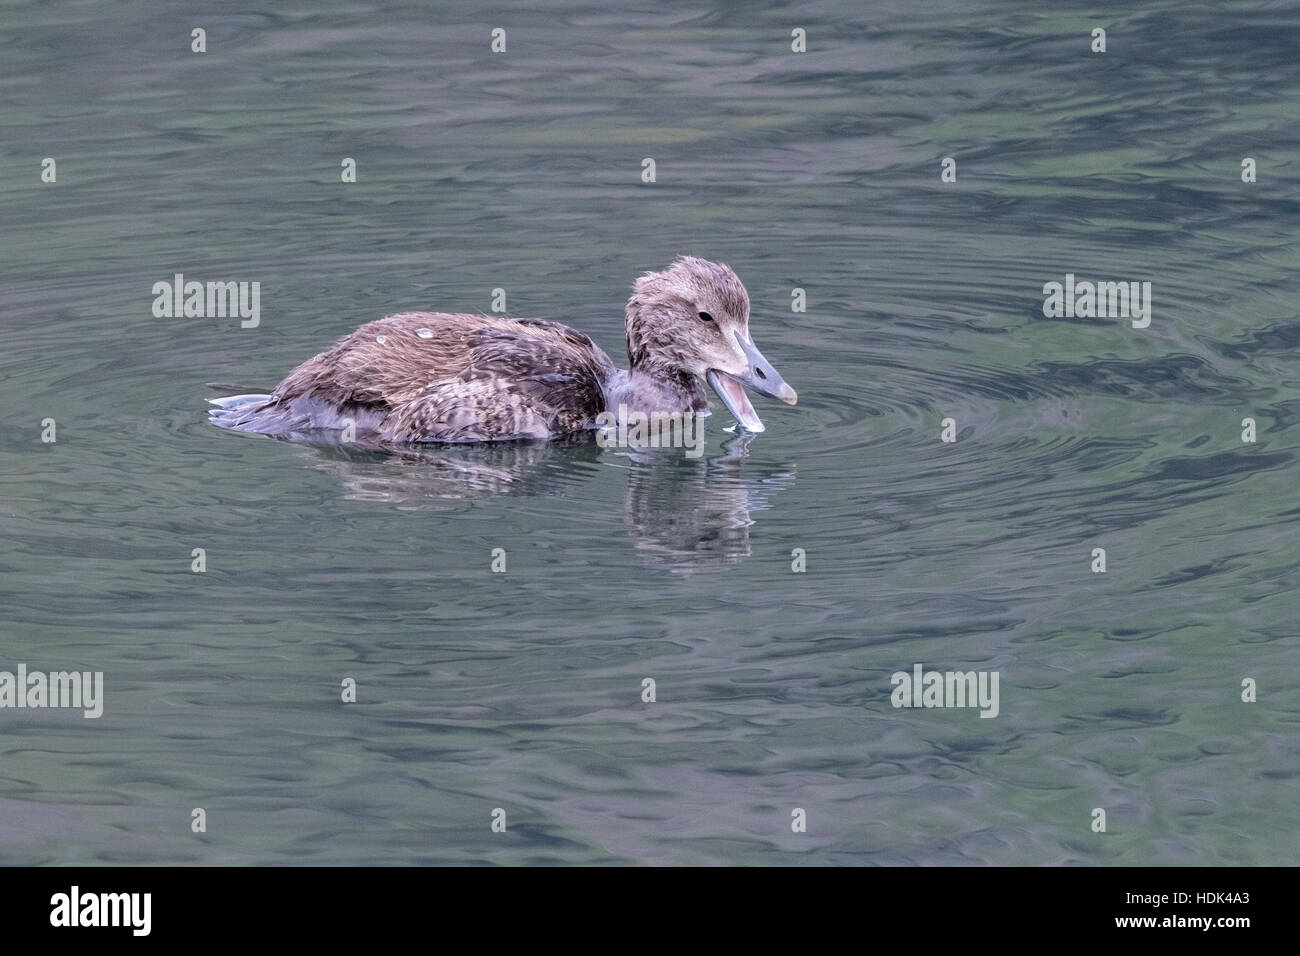 common eider (Somateria mollissima) juvenile duckling swimming on water on coast in Iceland Stock Photo